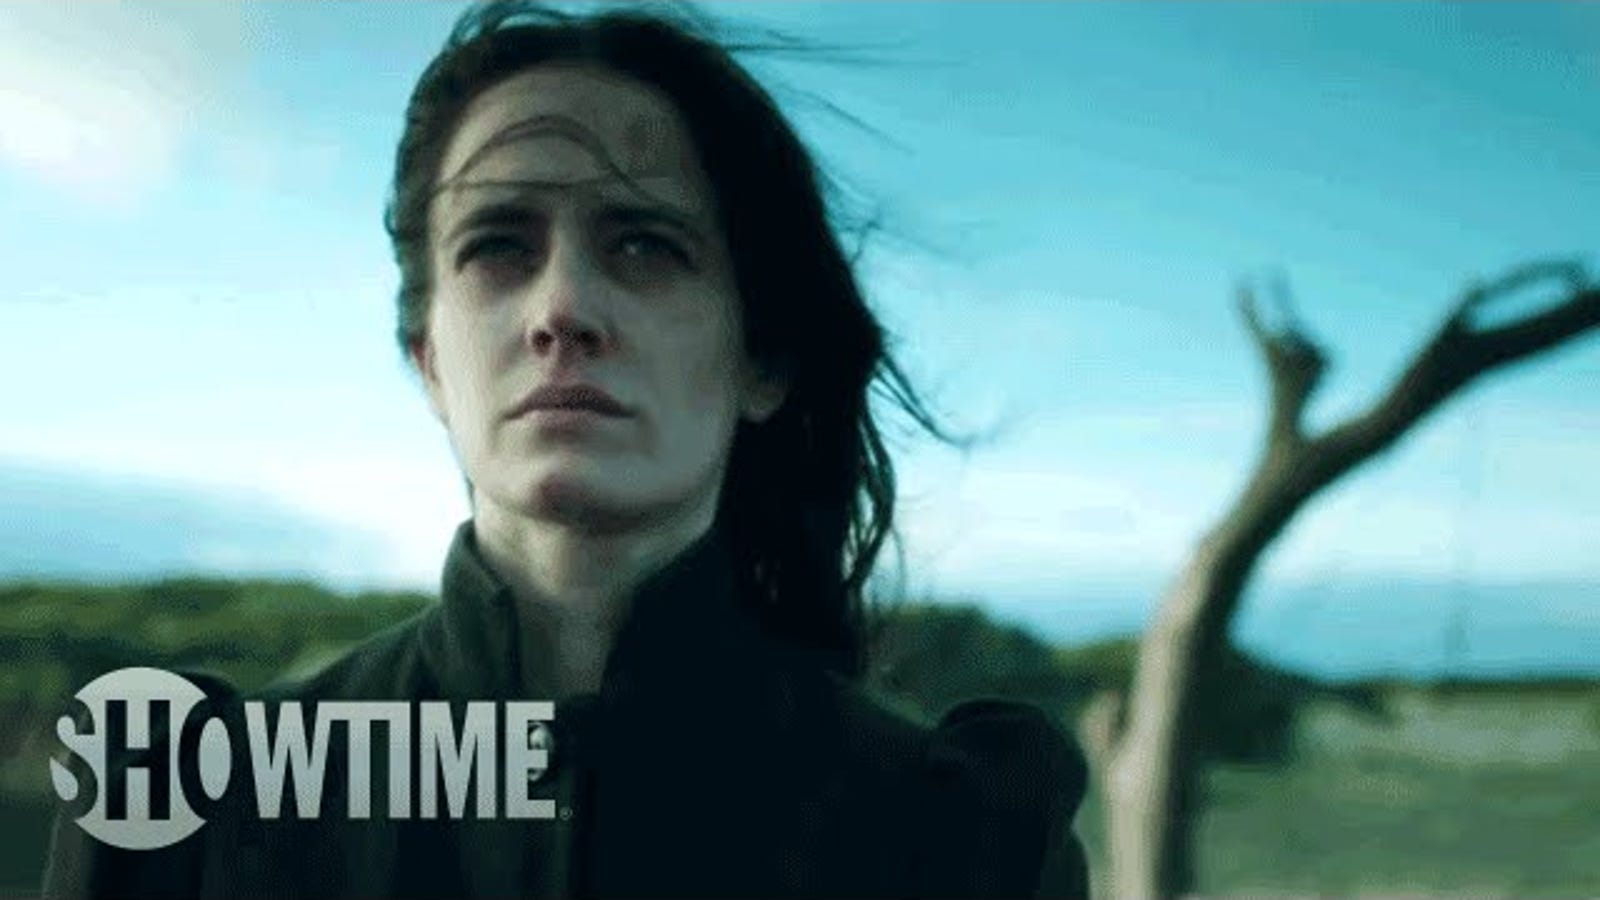 Penny Dreadful Trailer Has A Lot Of New Monsters And One Big Twist